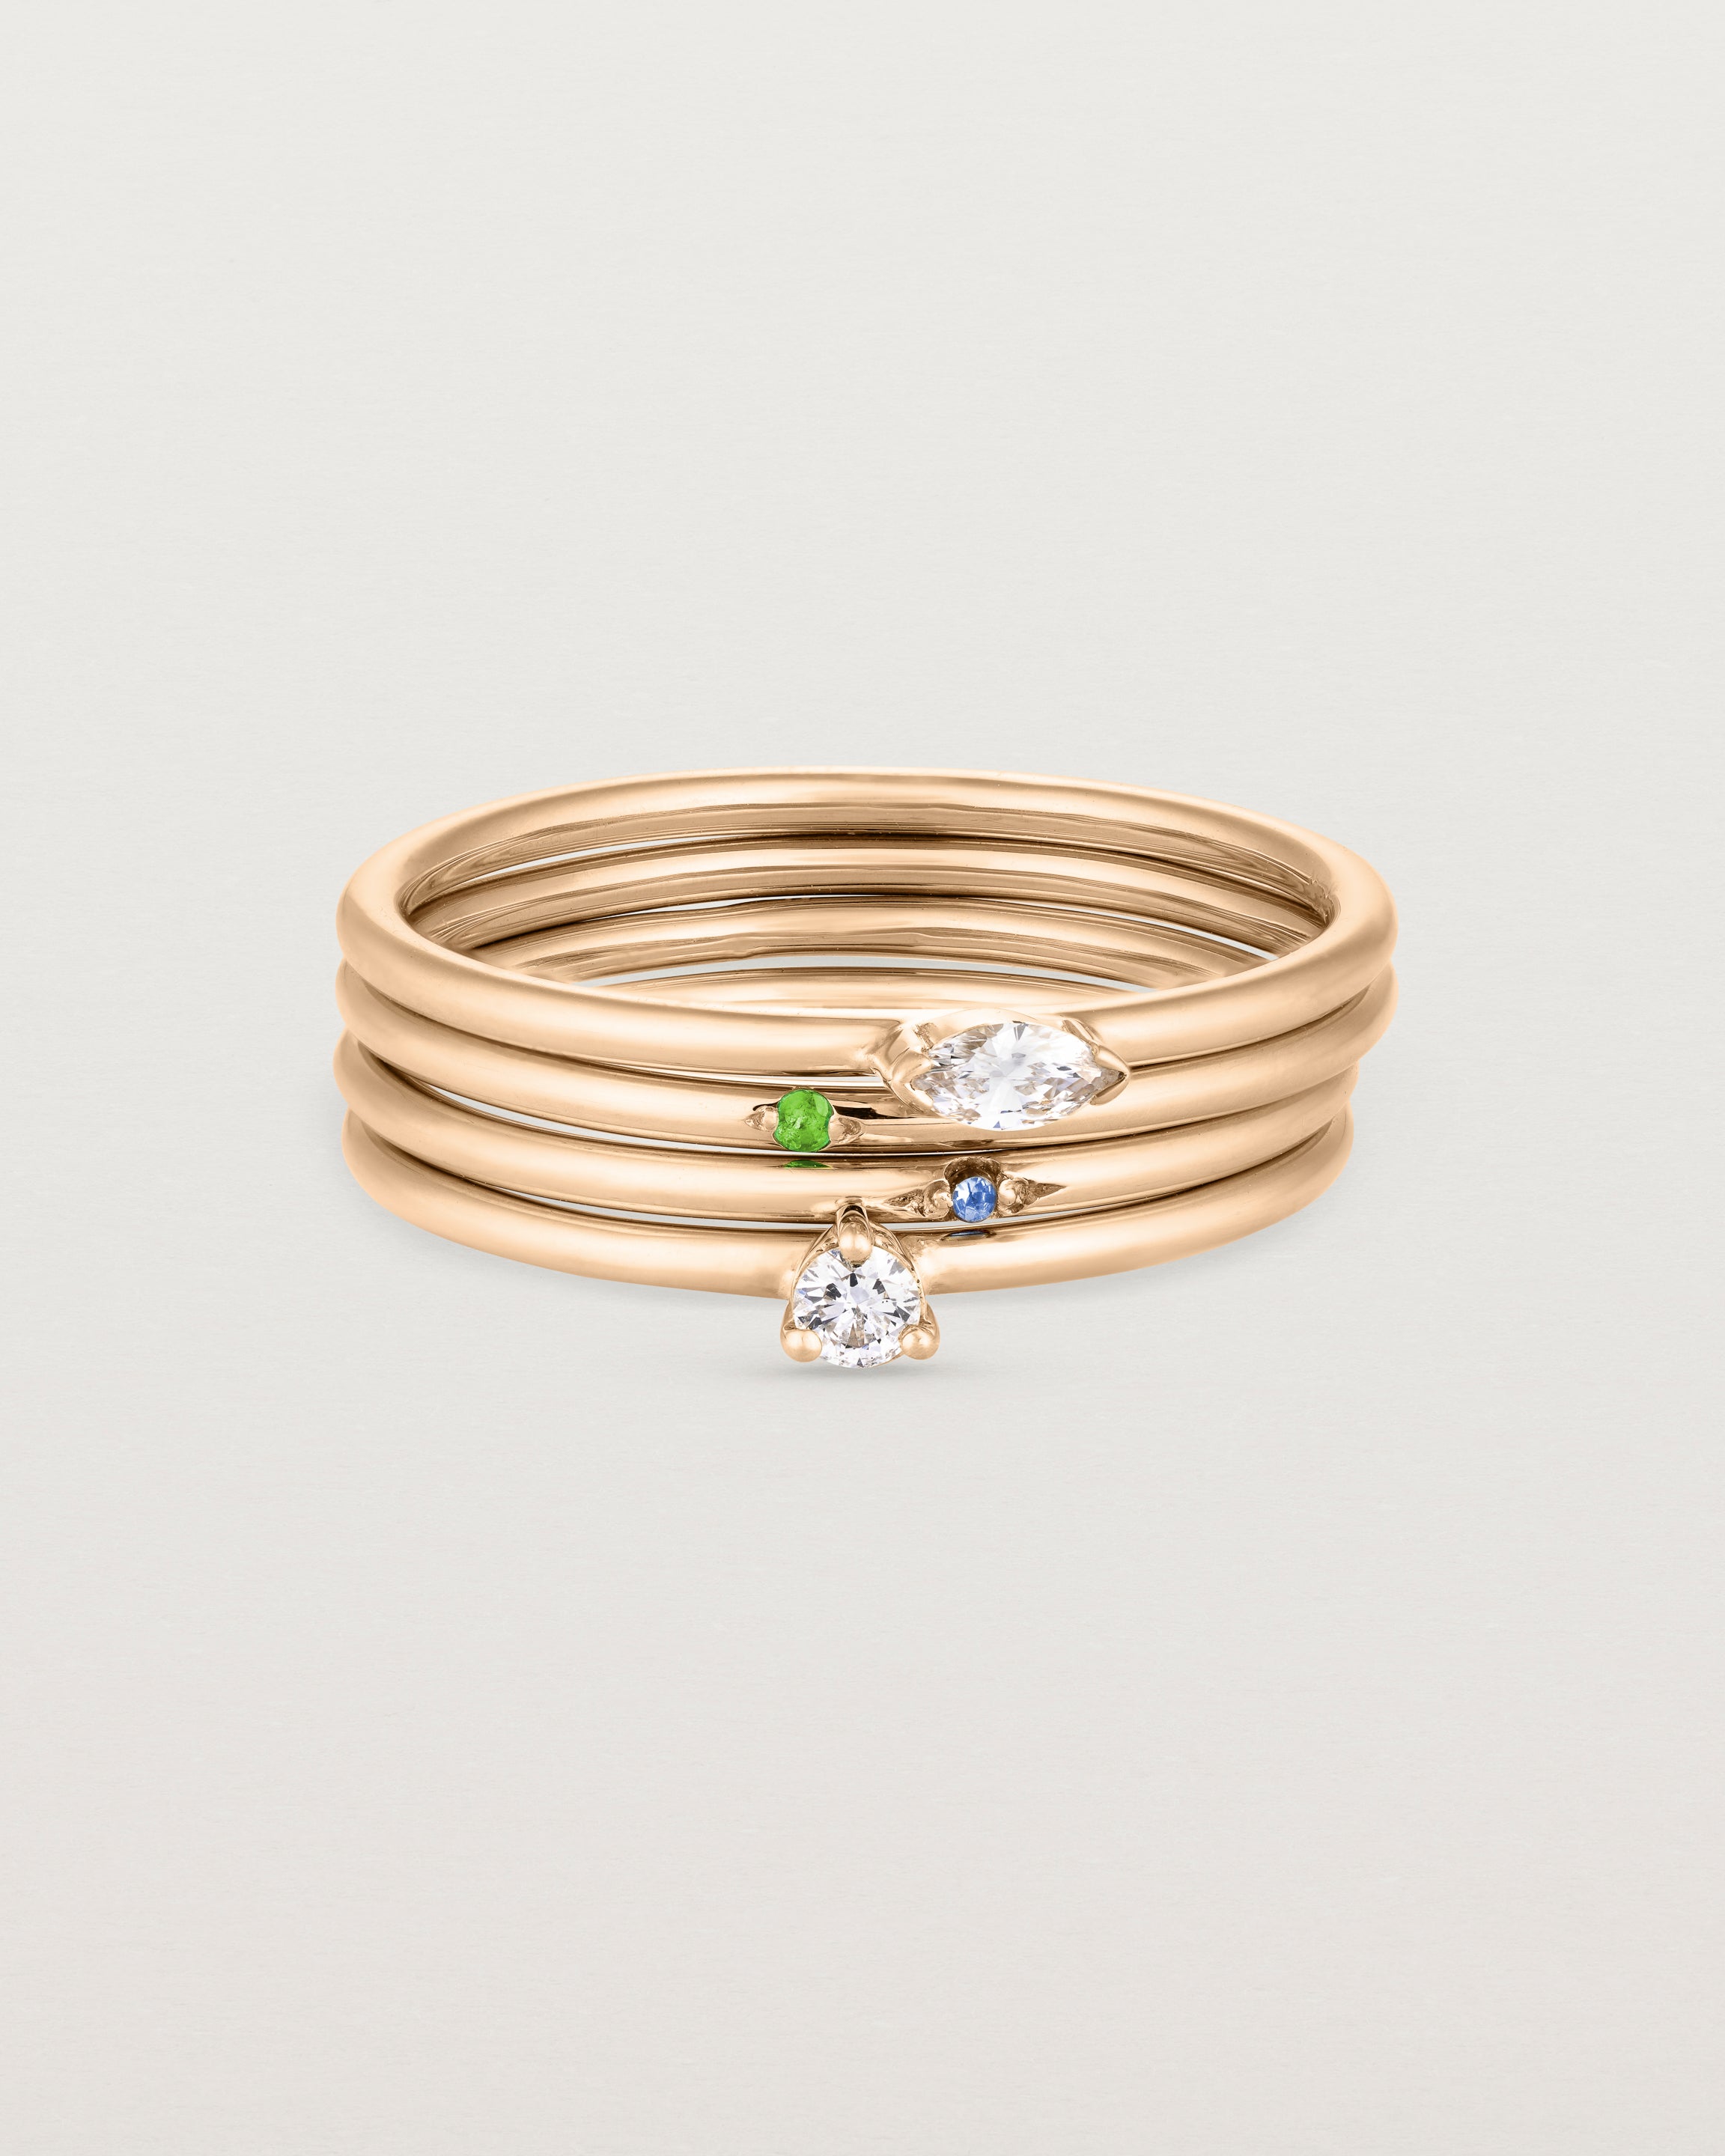 A set of four rose gold rings, featuring white diamonds and blue sapphire and an emerald.